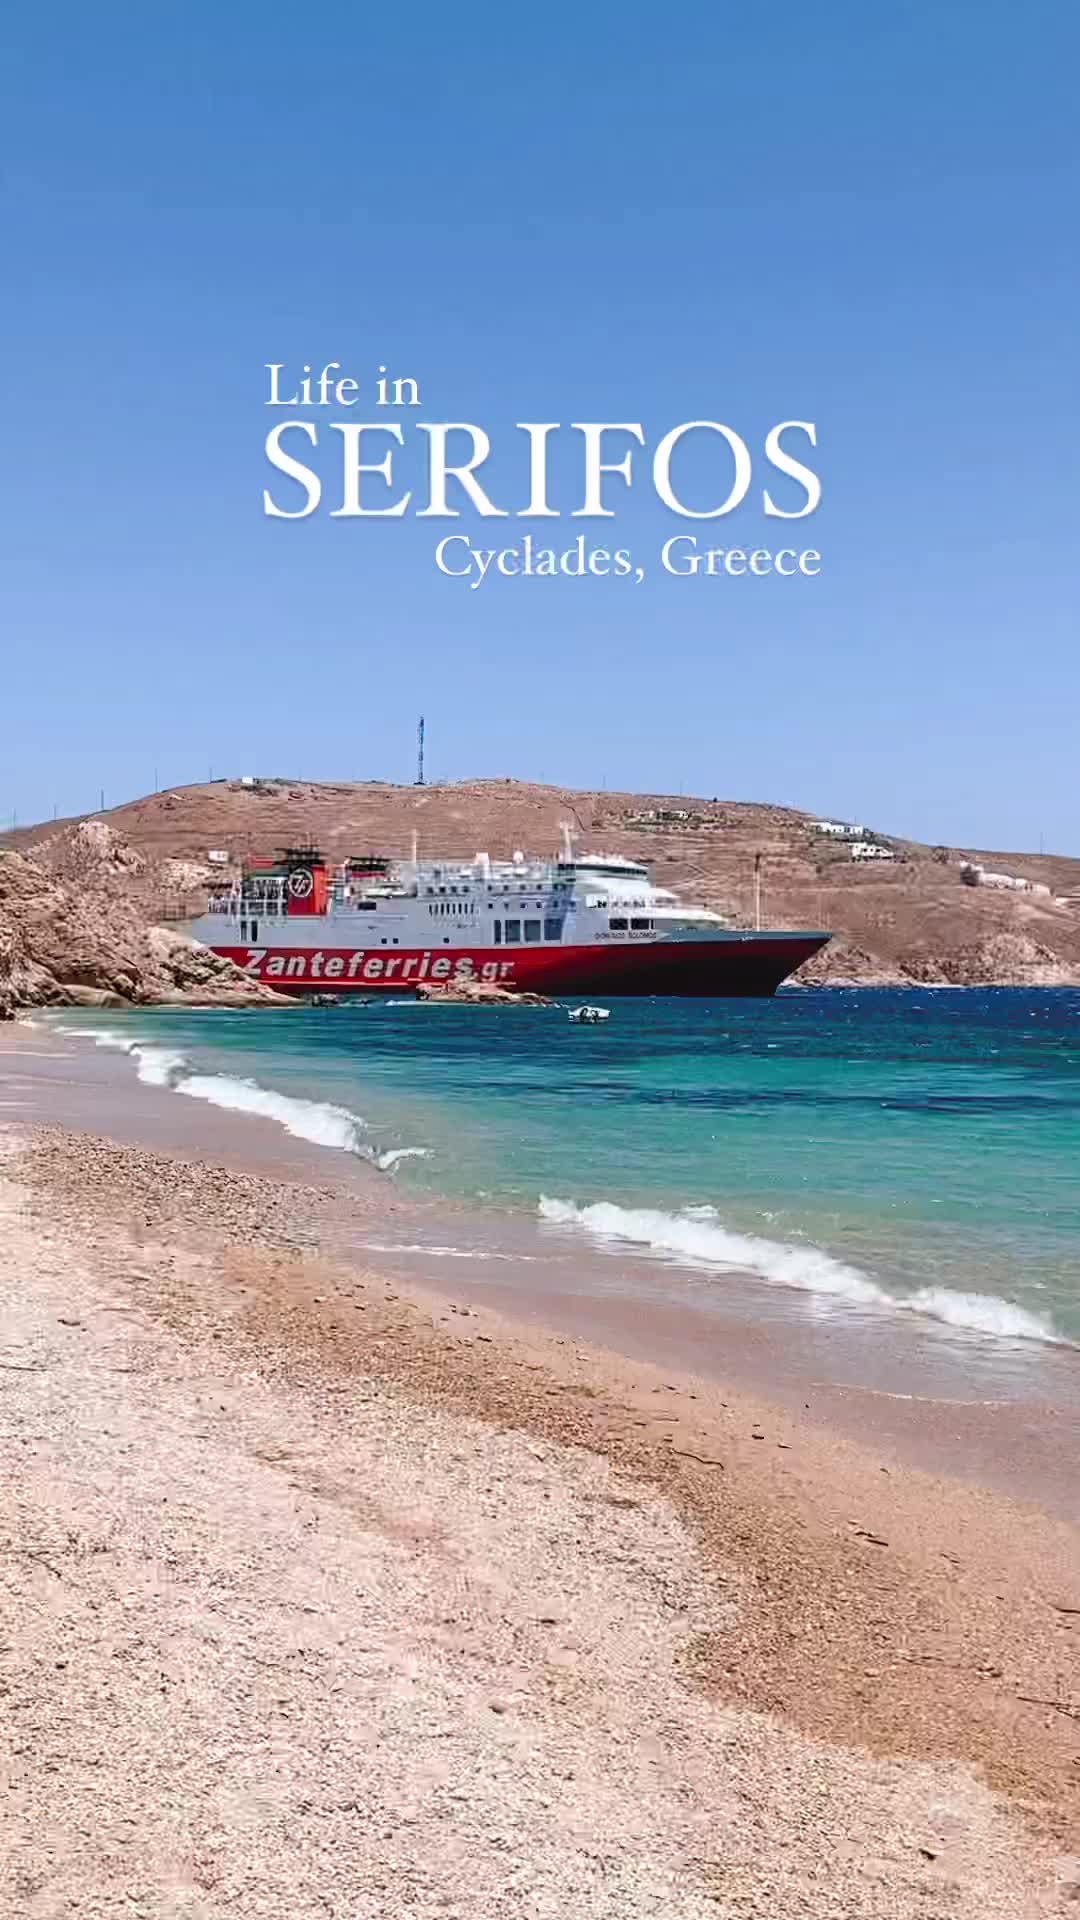 Discover Unspoiled Serenity in Serifos, Greece